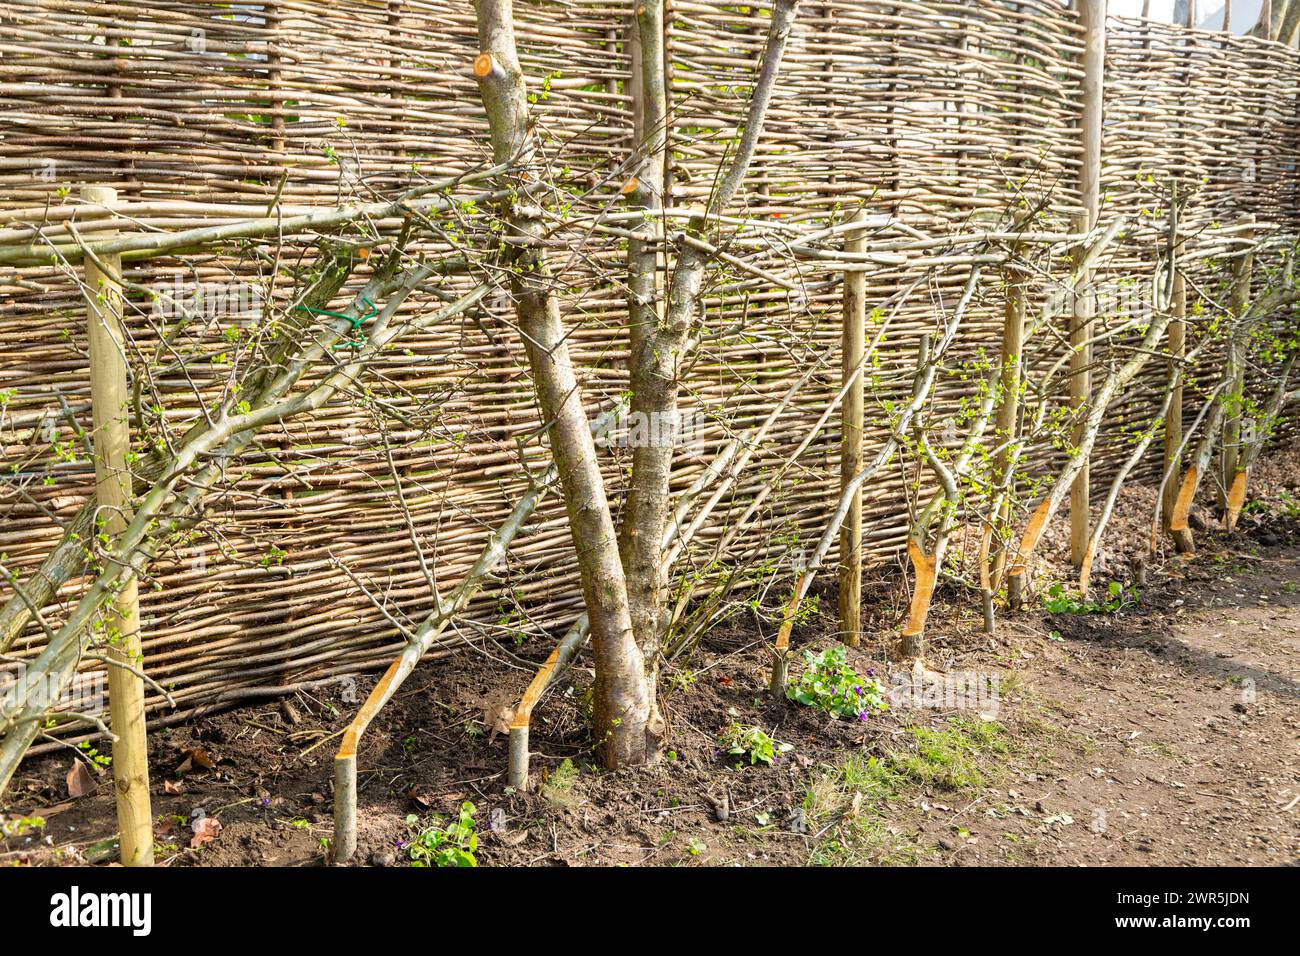 Hedge laying hawthorn hedging next to wicker fencing, UK Stock Photo